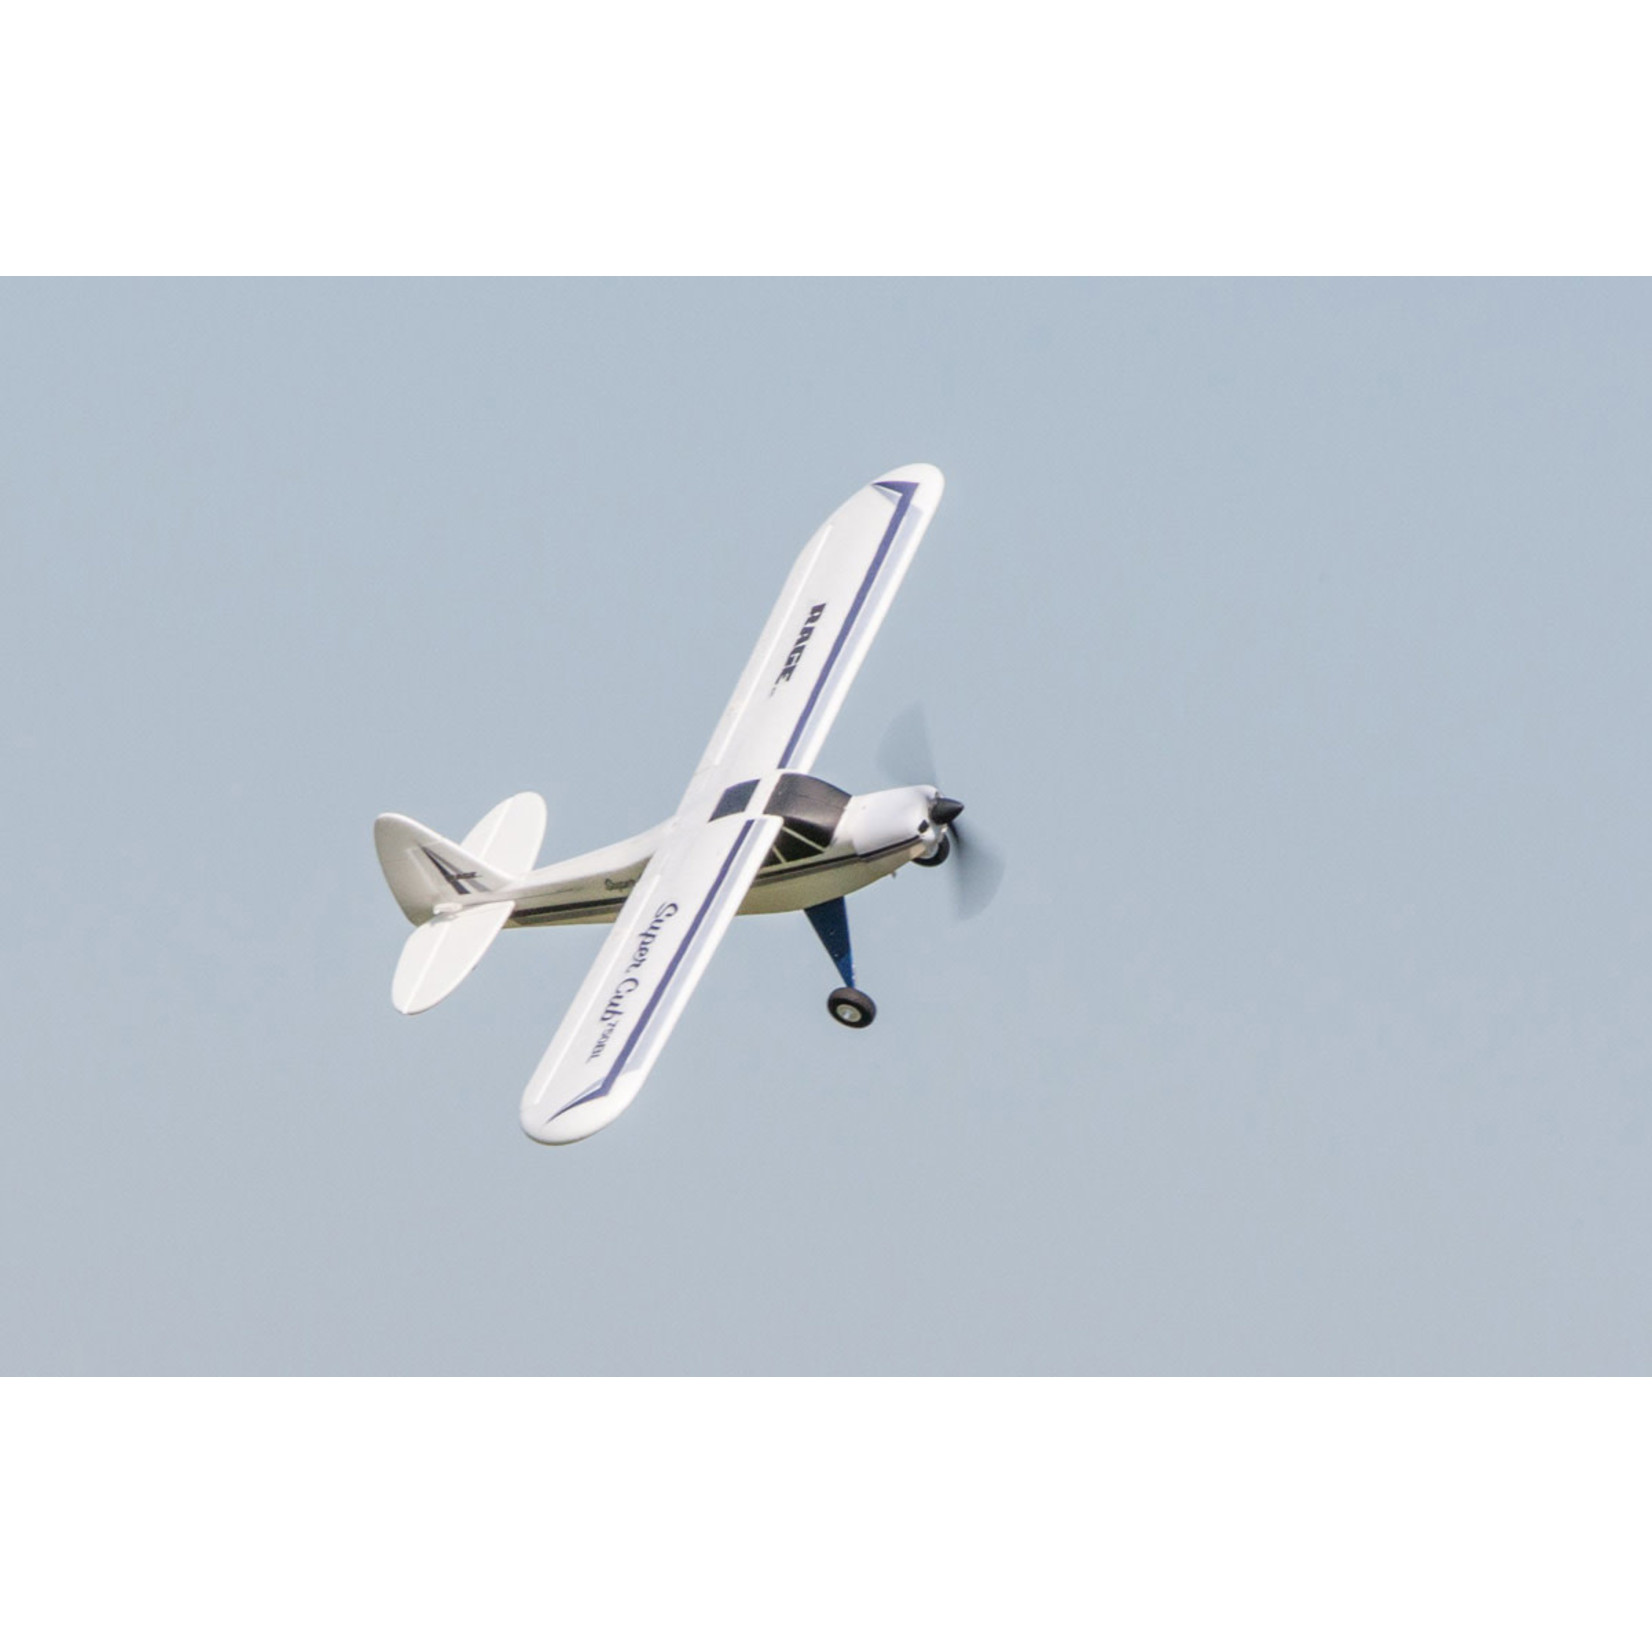 Rage RC Rage RC Super Cub 750 Brushless RTF 4-Channel Aircraft with PASS (Pilot Assist Stability Software) System #RGRA1500